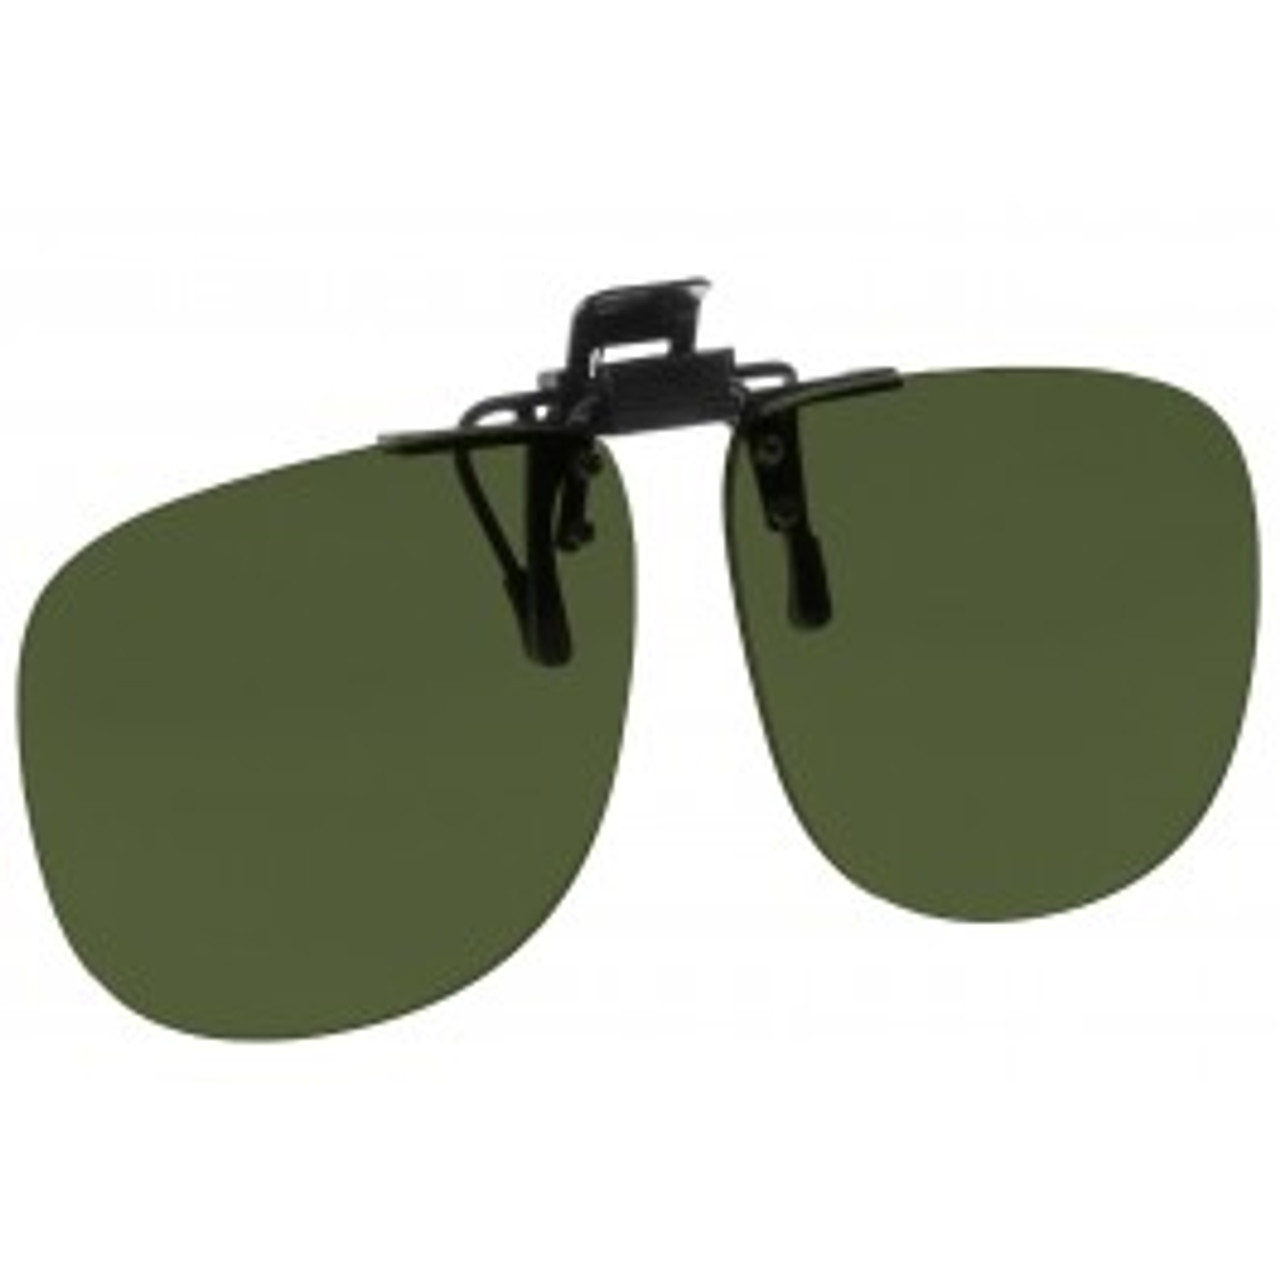 Clip On For Jambo - Gold 02 // Green g15* - L.G.R Eyewear